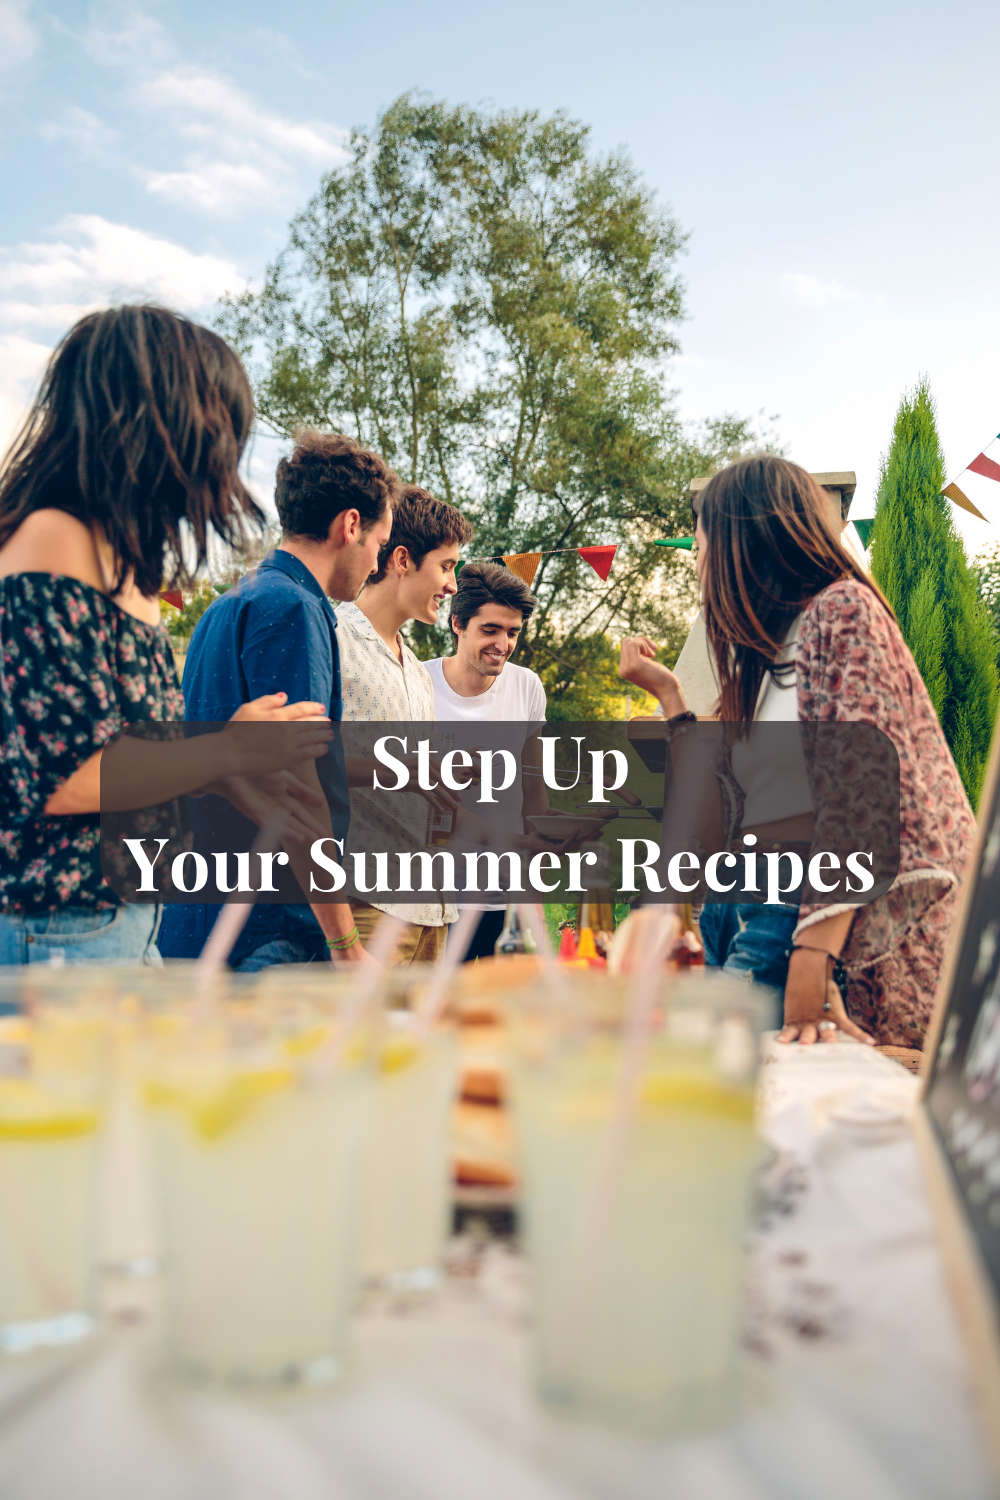 BBQ season is around the corner and that means you're going to need amazing summer recipes to share. Step up your game with these 5 dishes!